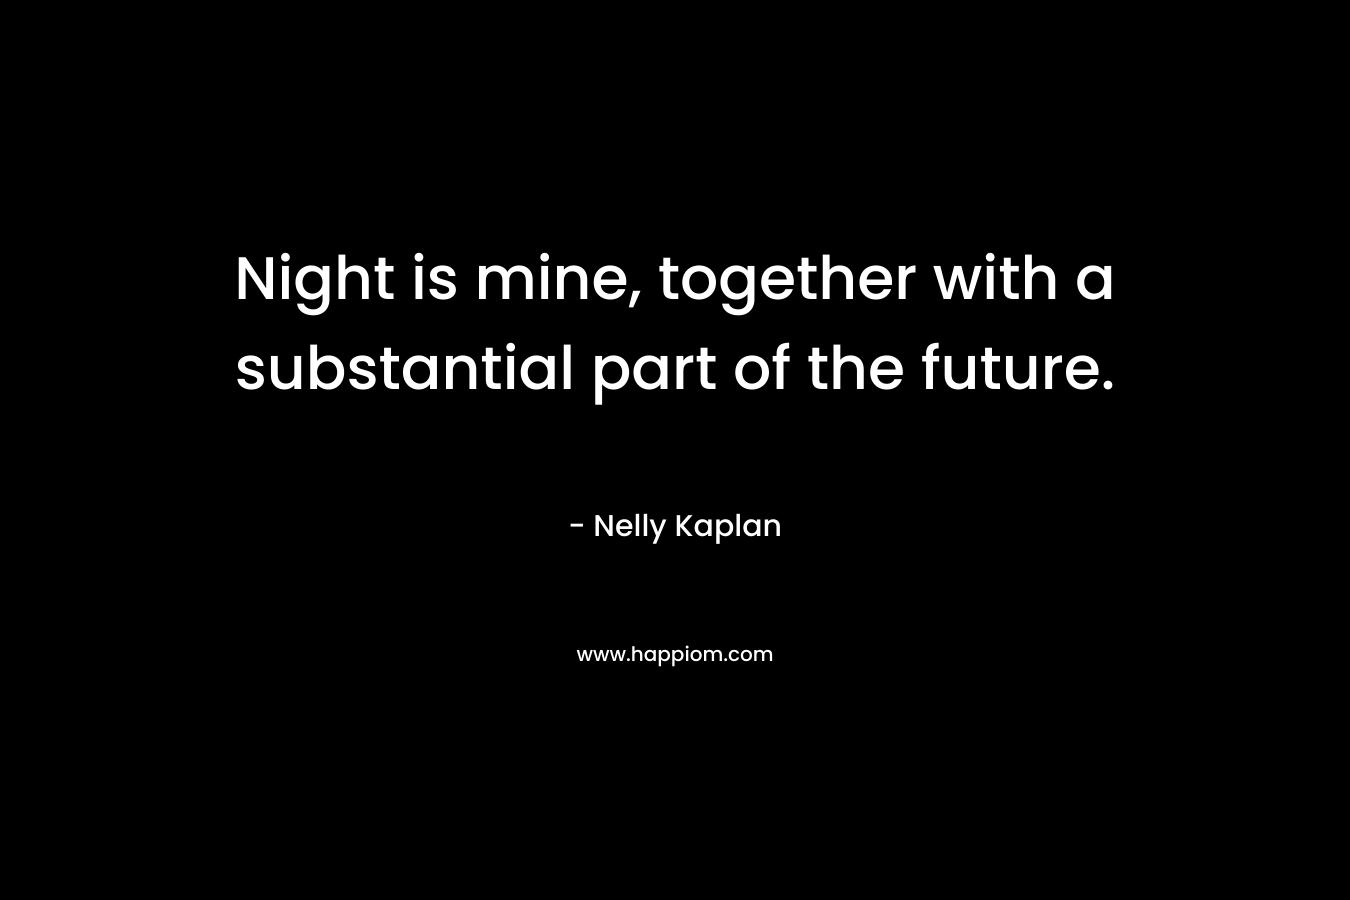 Night is mine, together with a substantial part of the future.